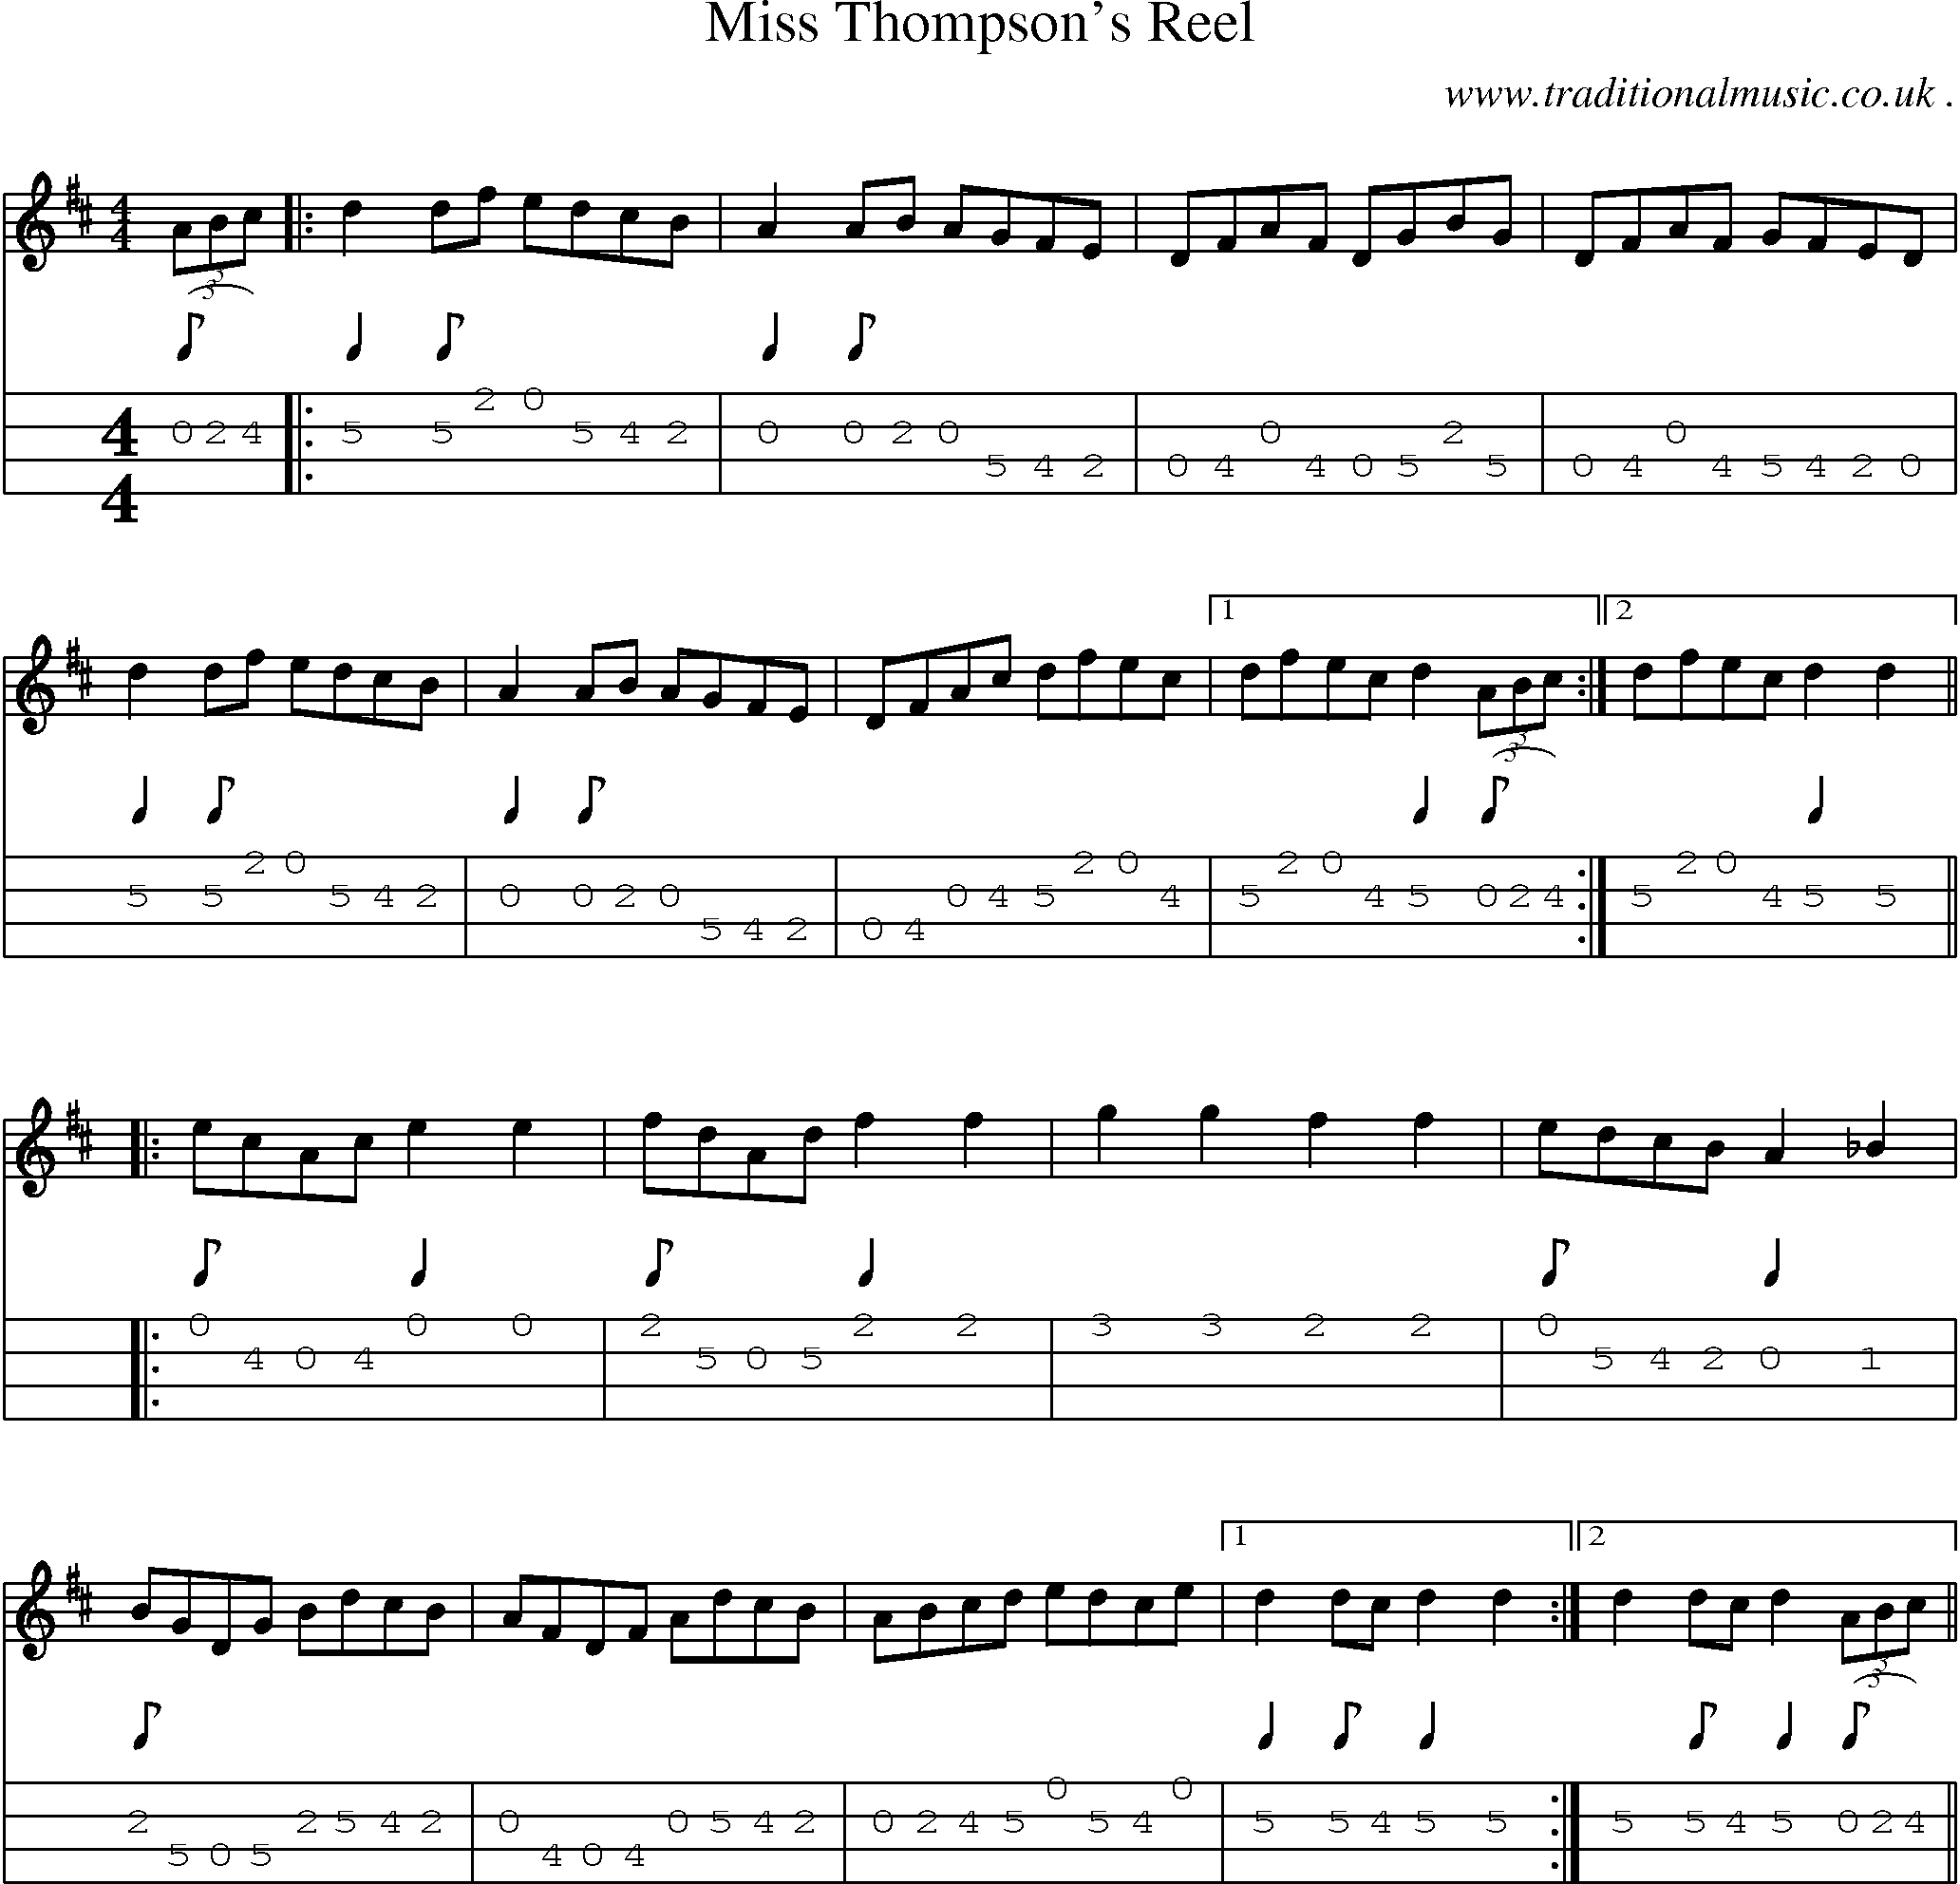 Sheet-Music and Mandolin Tabs for Miss Thompsons Reel